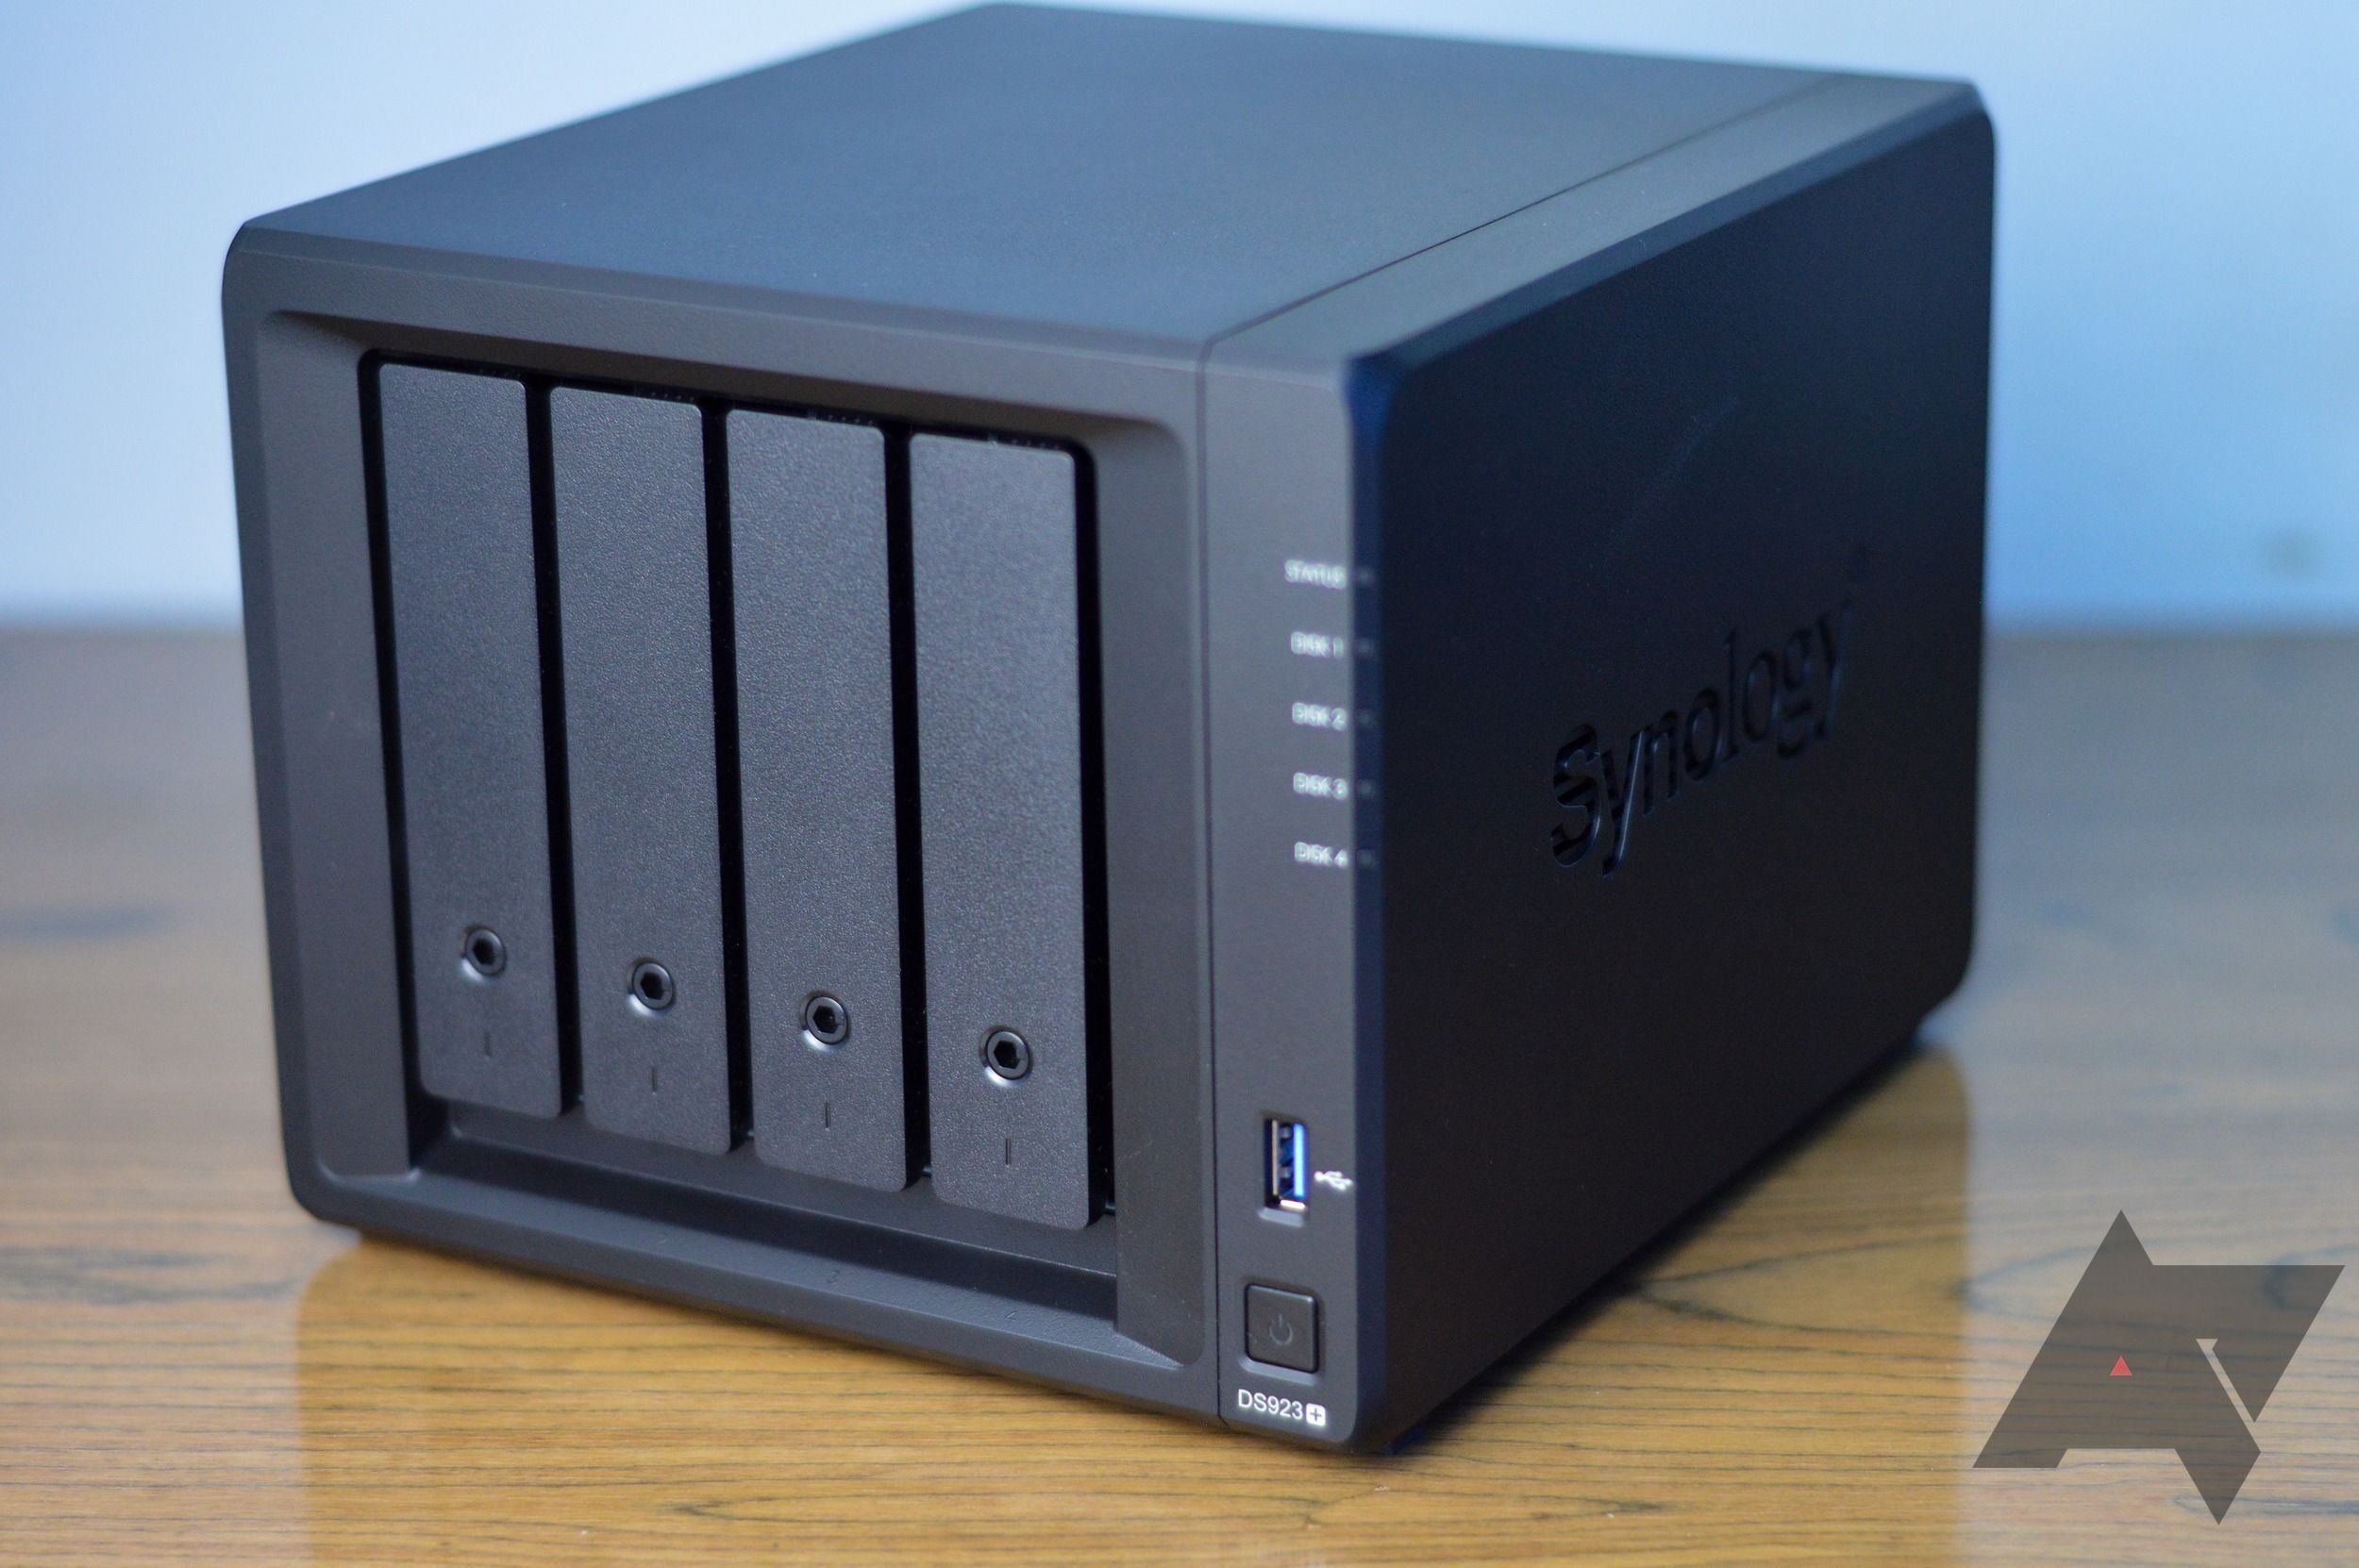 Synology Disk Station DS923 4 Bay NAS